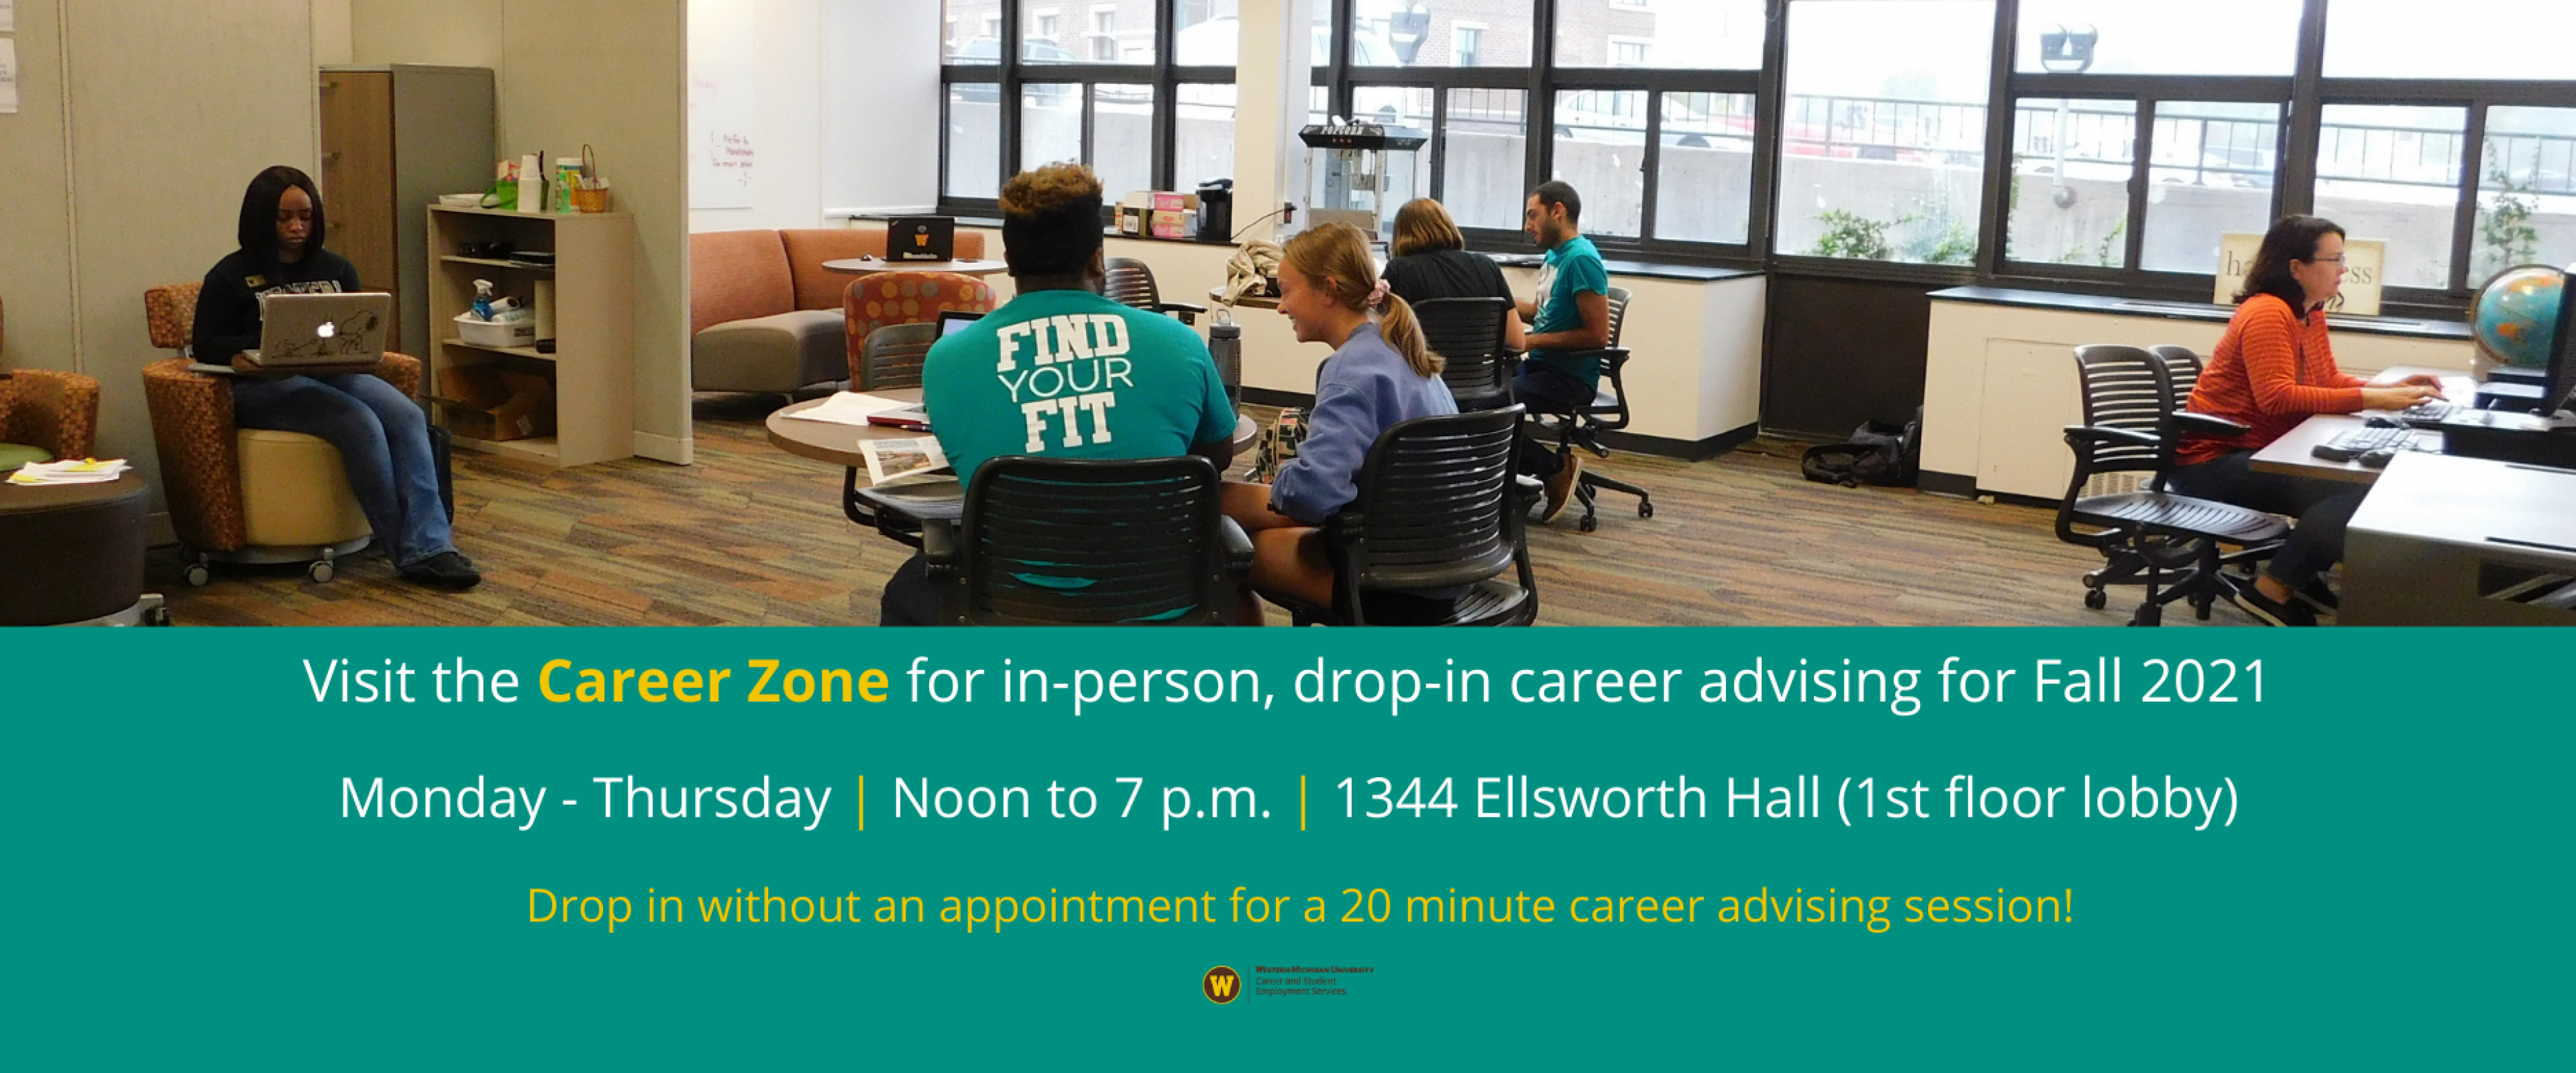 Visit the Career Zone for in-person, drop-in career advising for Fall 2021. Monday through Thursday, noon to 7 p.m., 1344 Ellsworth Hall (1st floor lobby). Drop in without an appointment for a 20 minute career advising session!